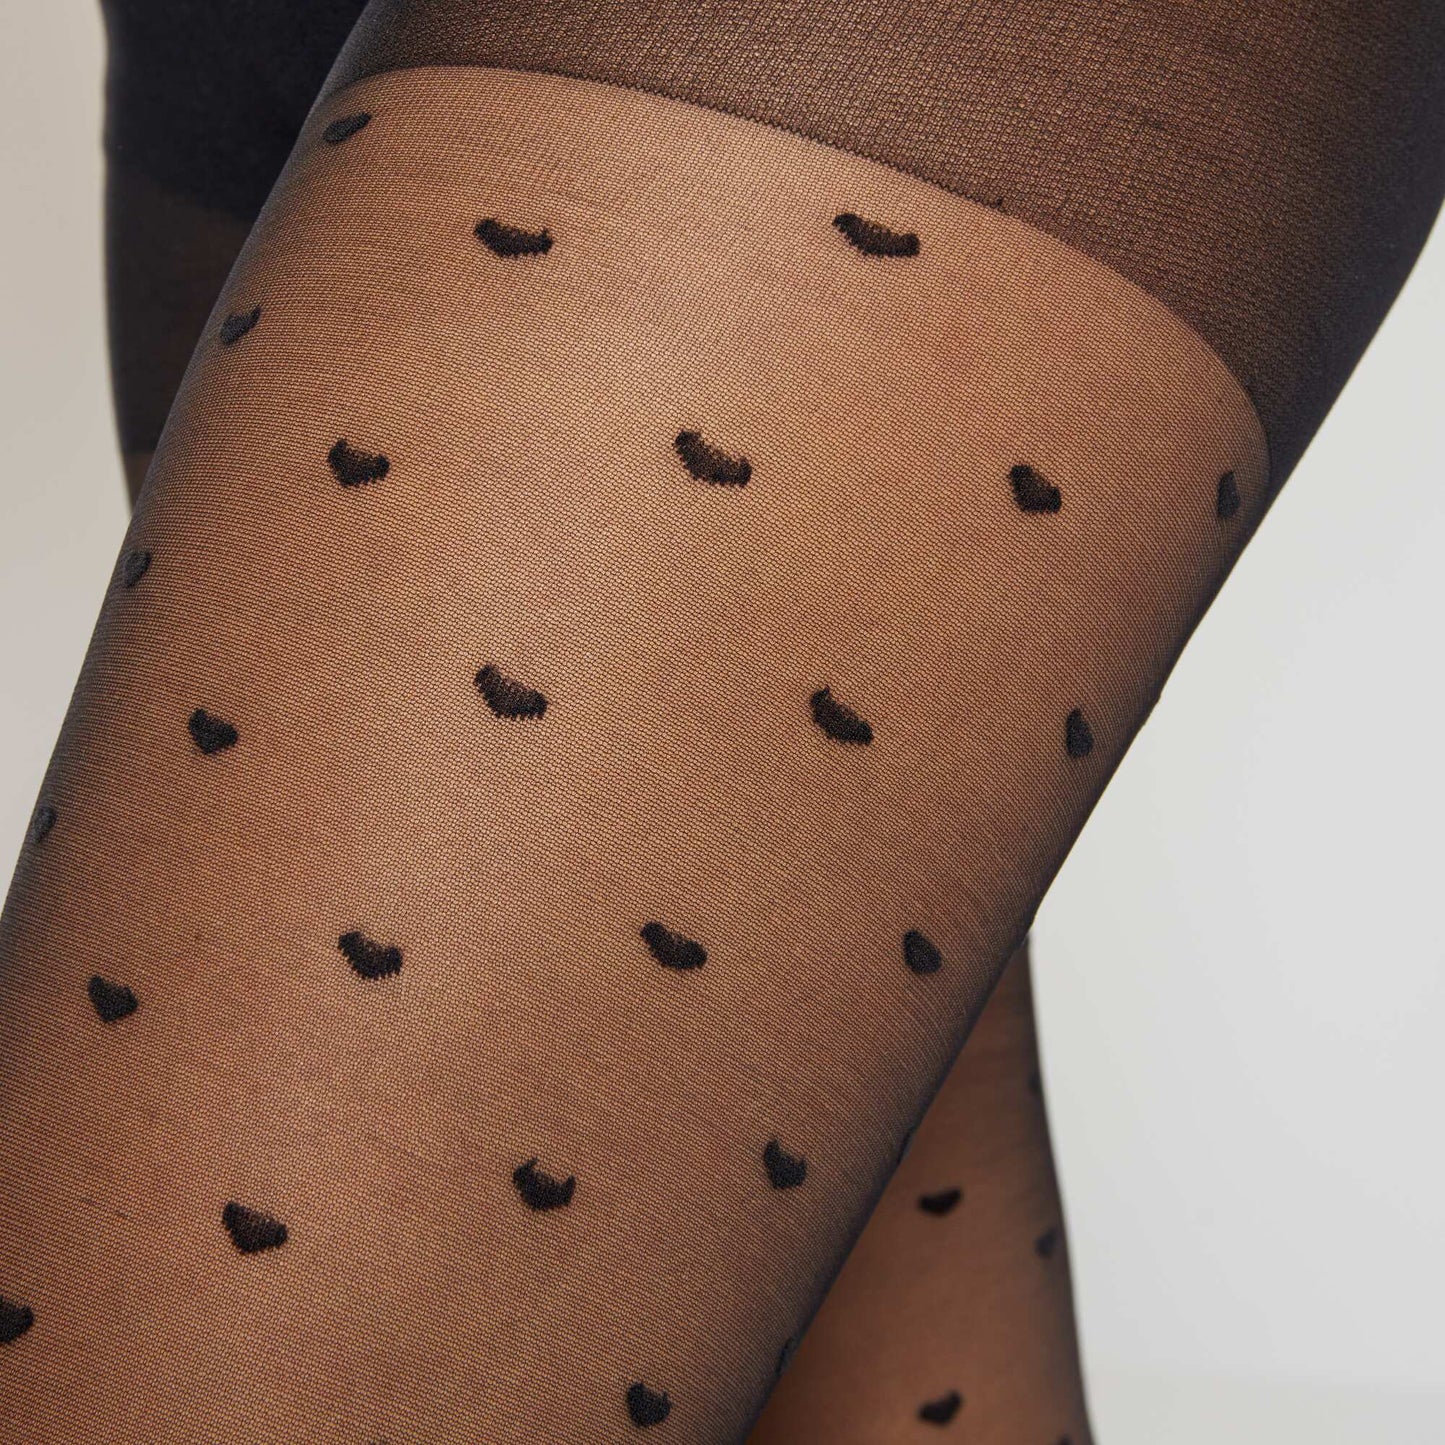 20-denier dotted voile tights with hearts black